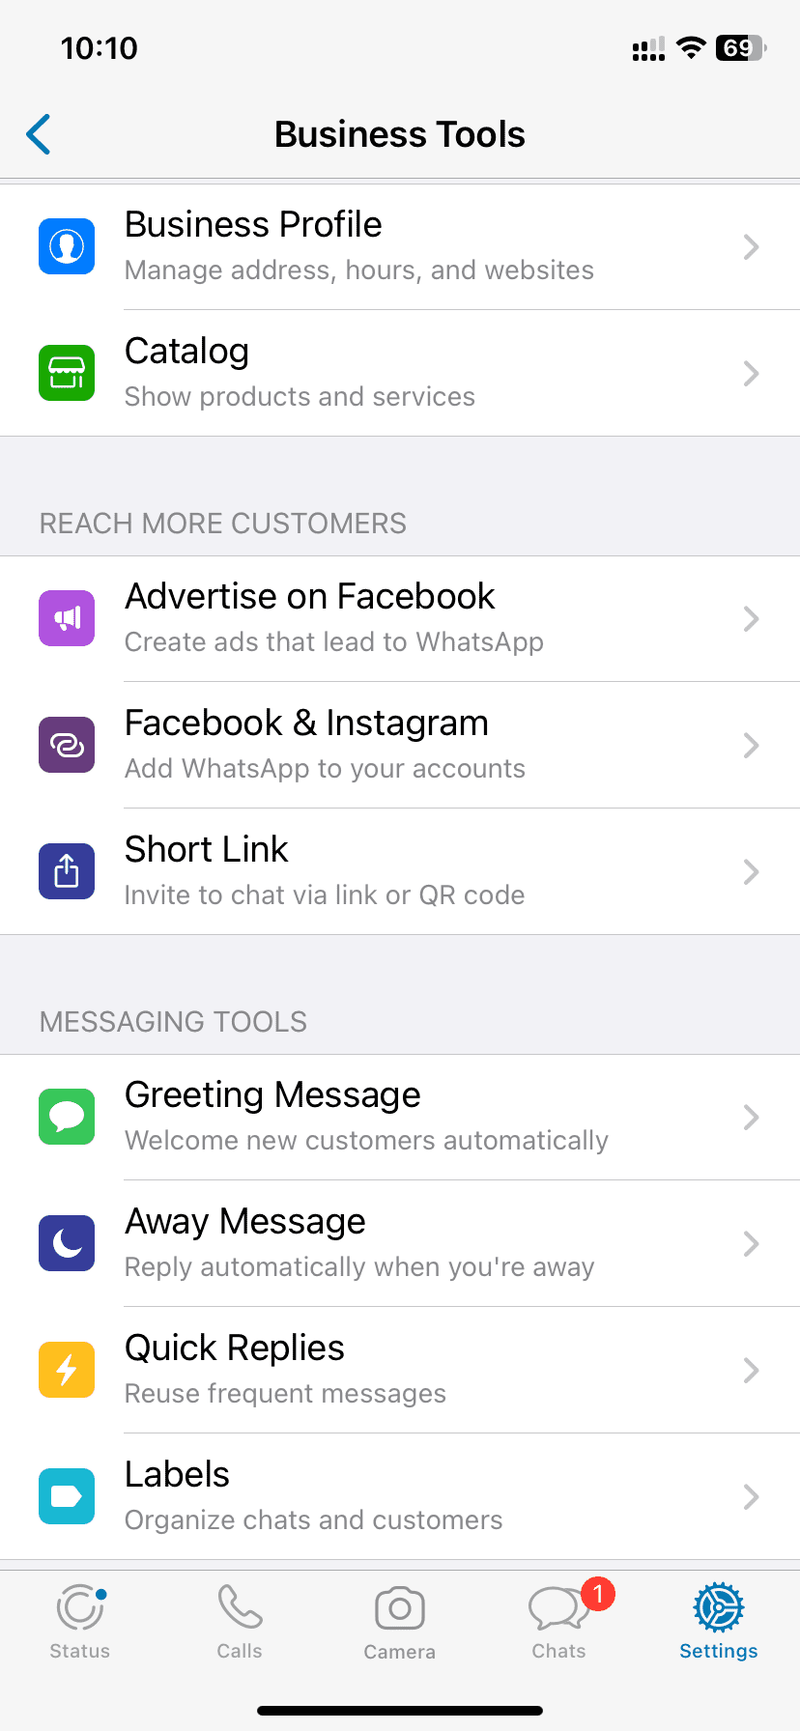 Business-Tools in der WhatsApp Business App iPhone